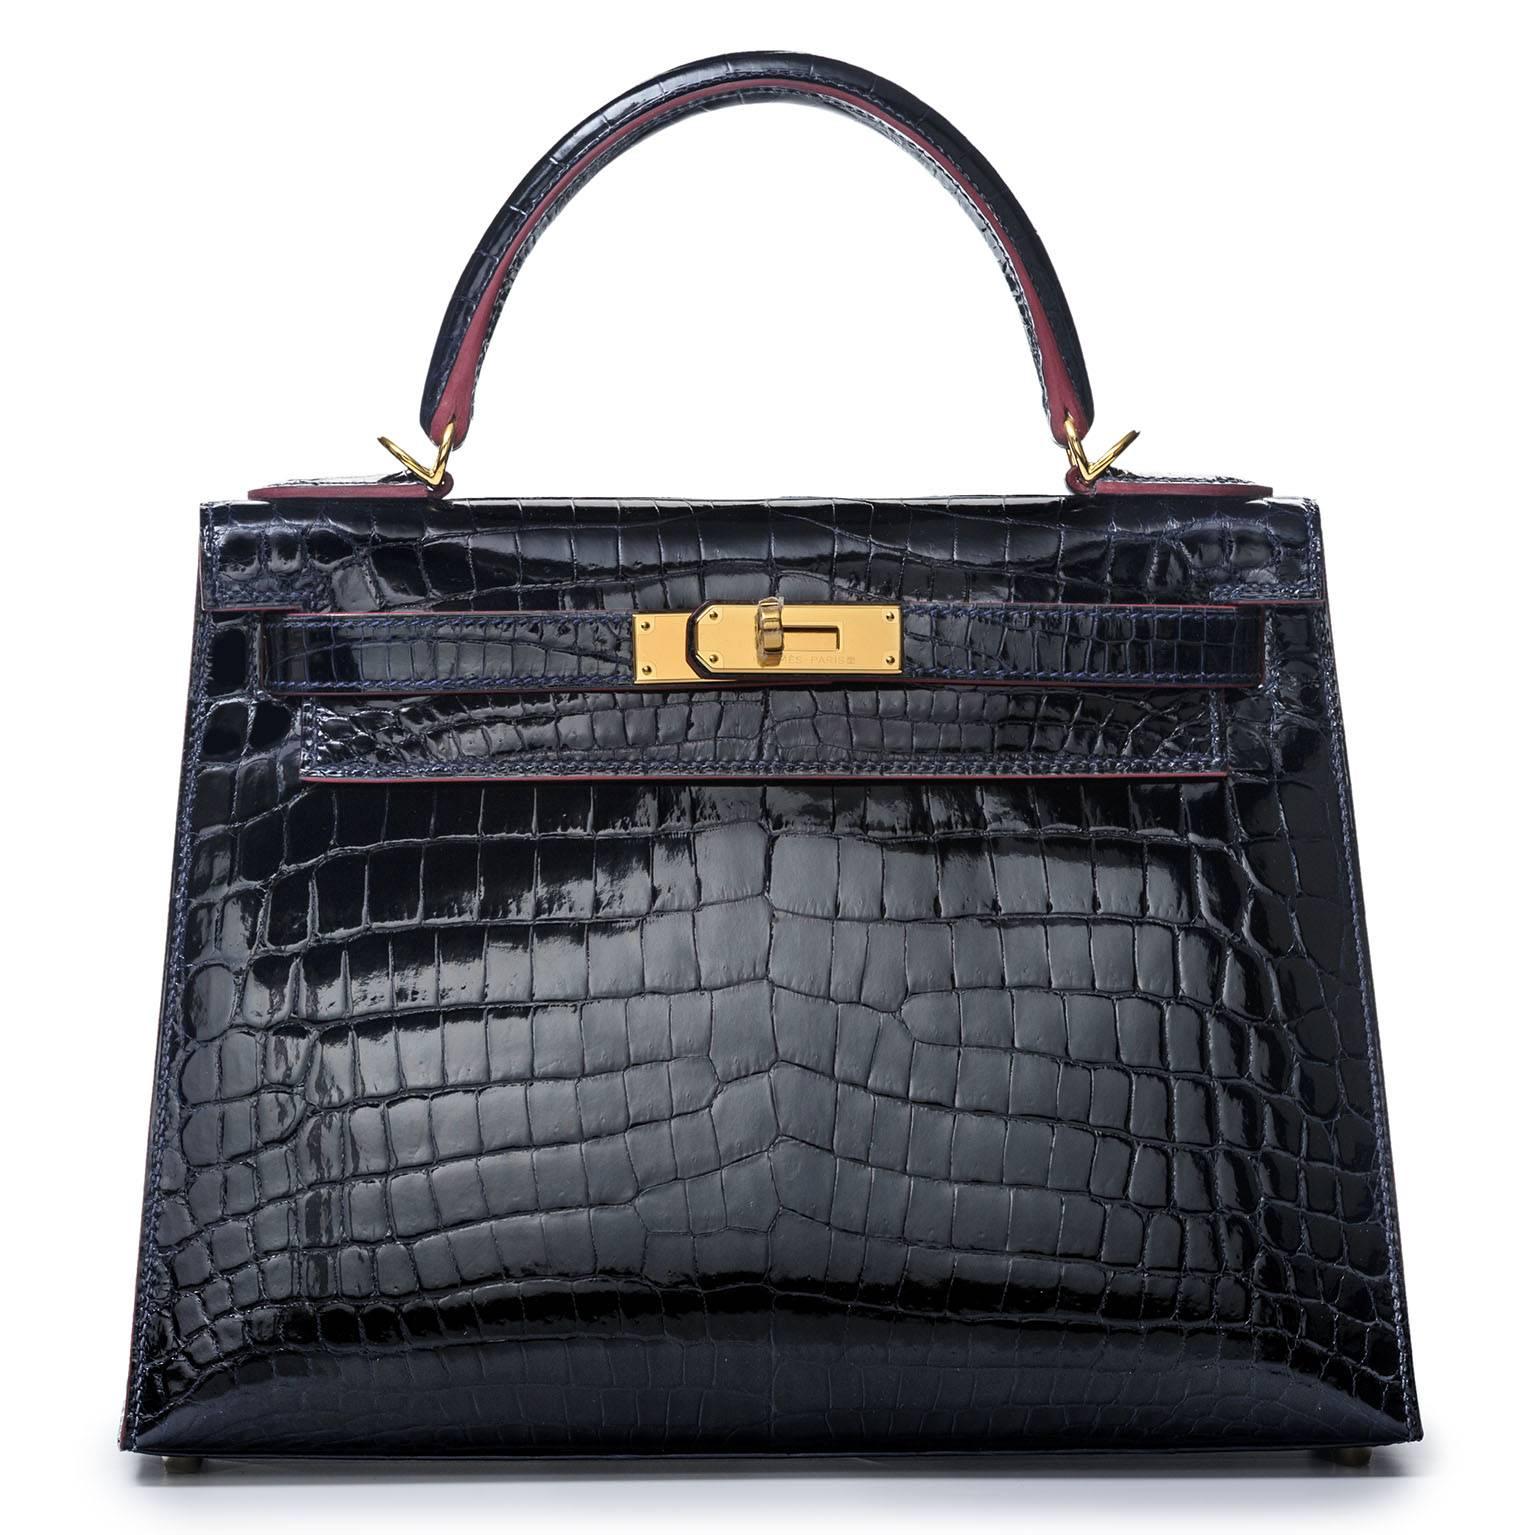 Extremely rare collectors item! 
Limited Edition! Very very few made in crocodile!
Only 1 here at 1stDibs!

Kelly Sellier 28 cm CONTOUR RED Bleu Marine Shiny Nilo Croc with gold hardware! Absolutely stunning bag looking for new owner